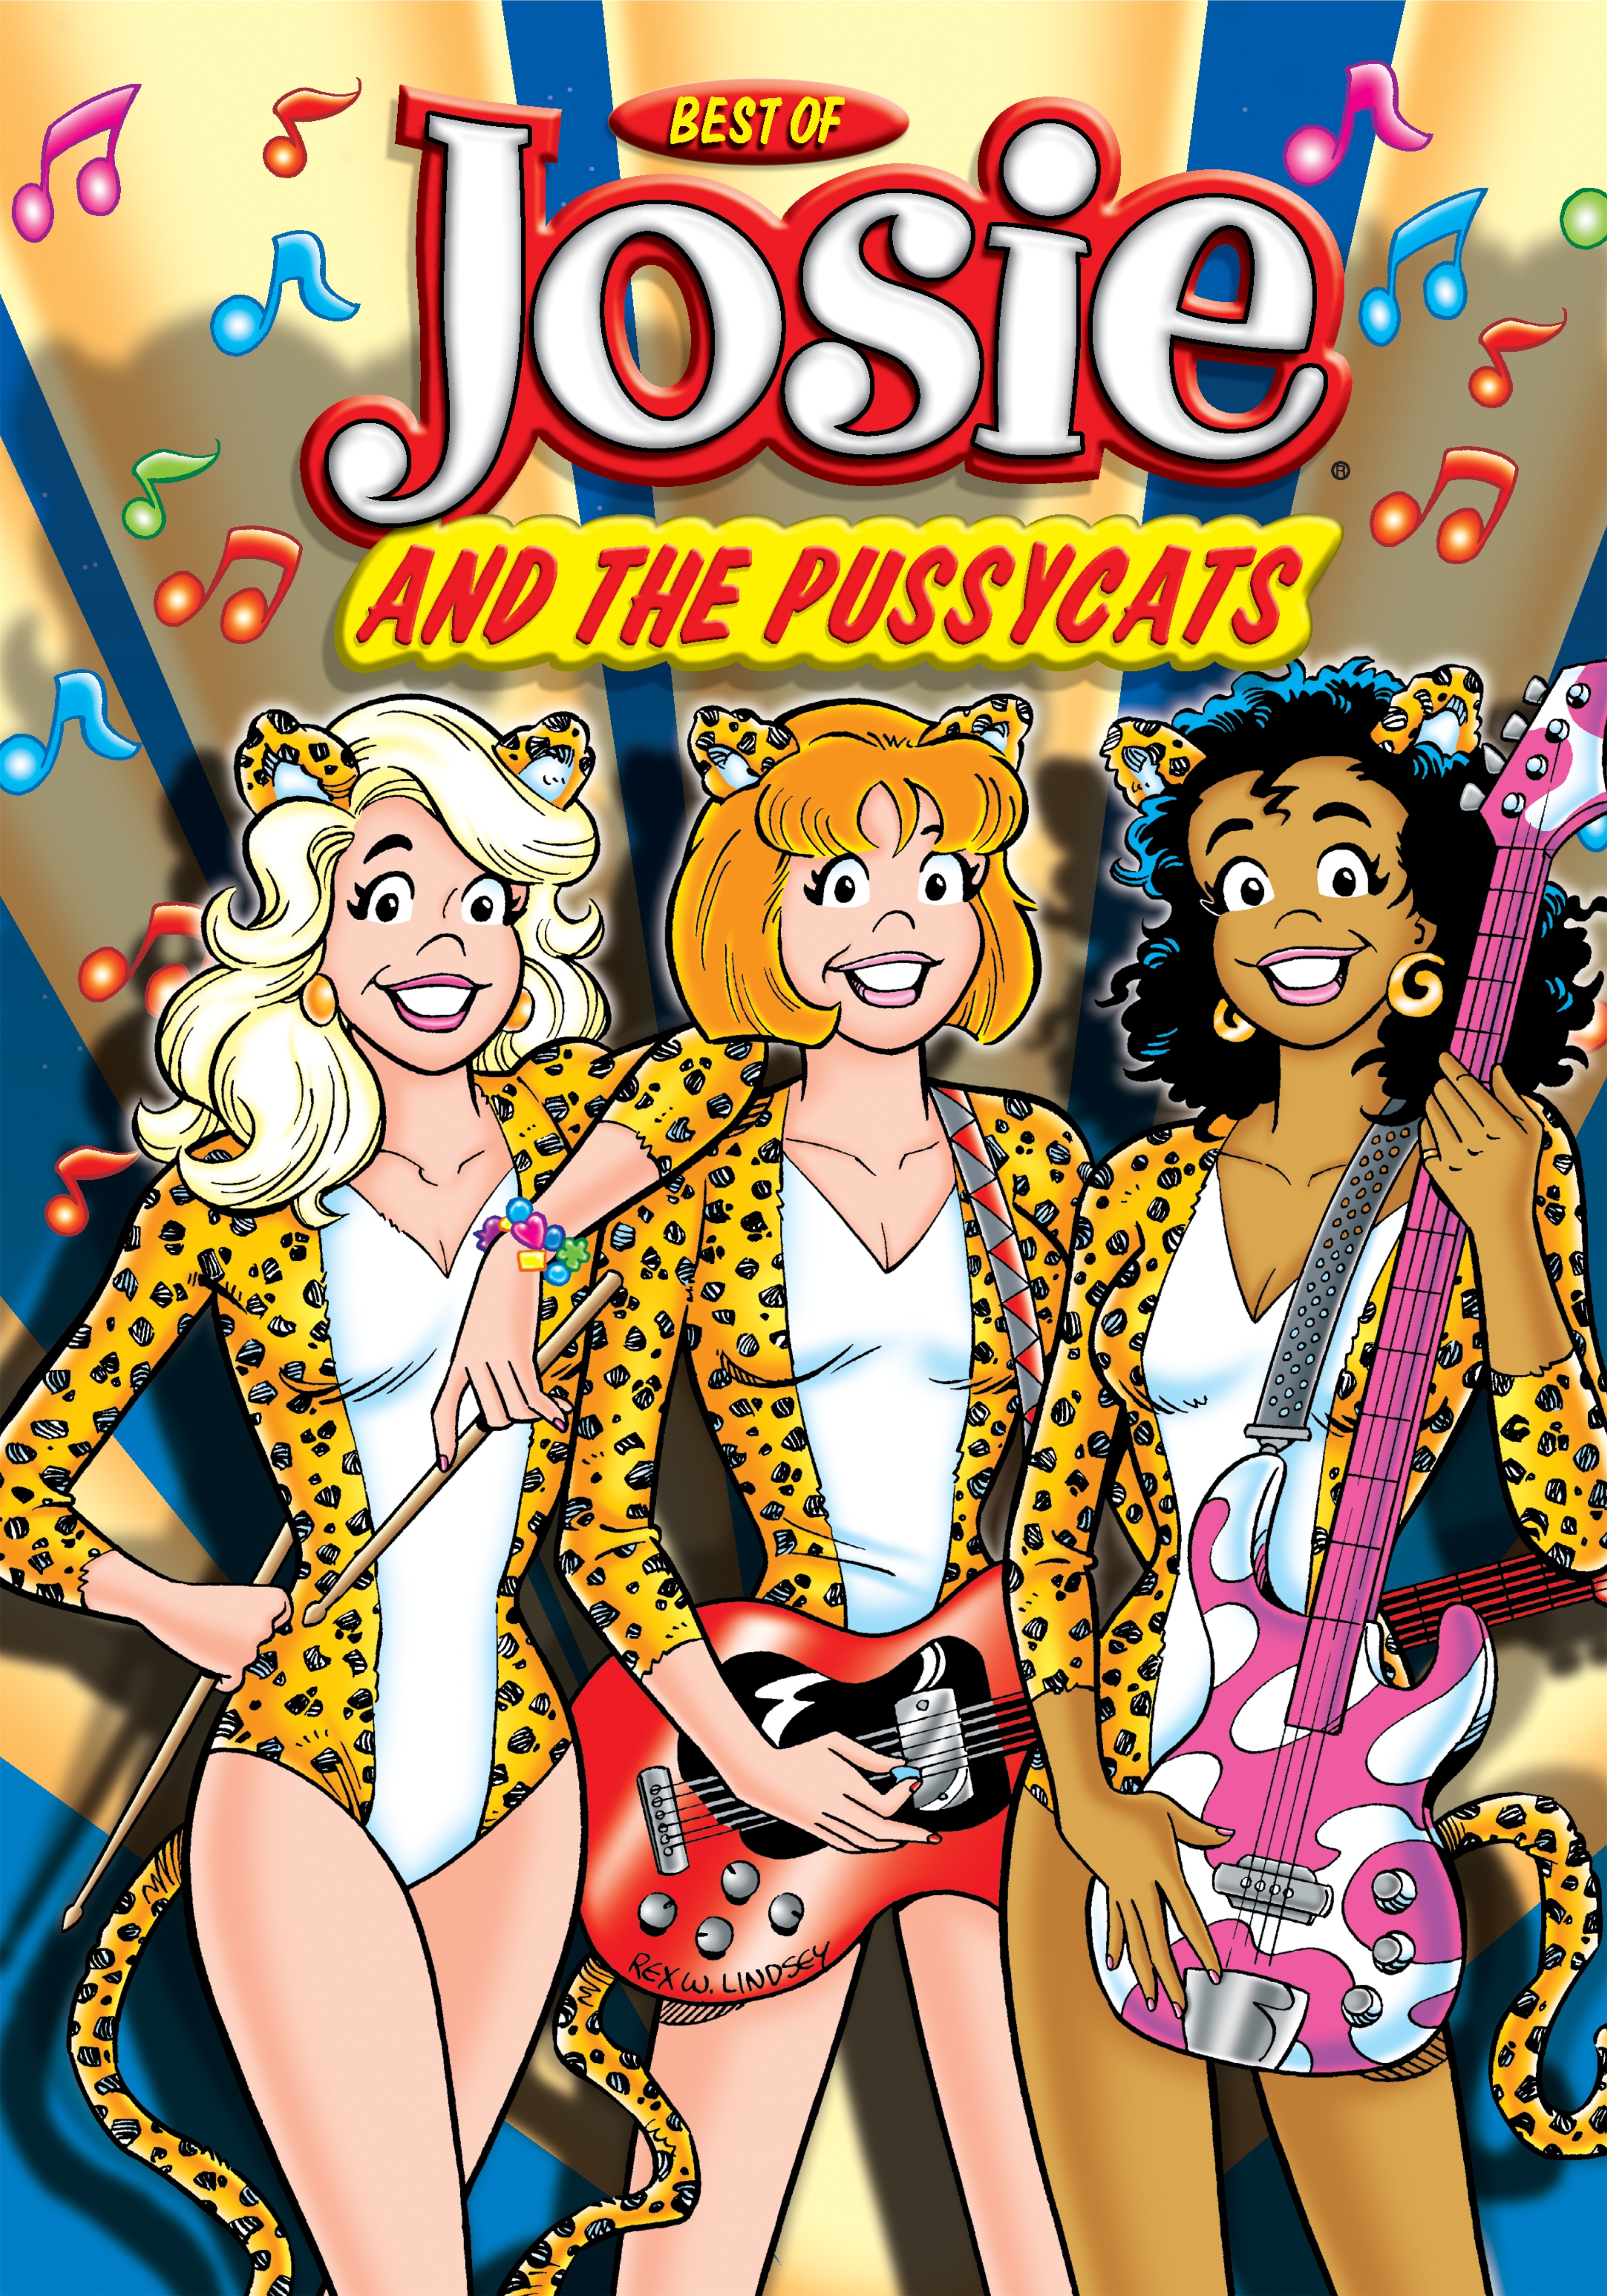 The Best Of Josie And The Pussycats By Frank Doyle Penguin Books